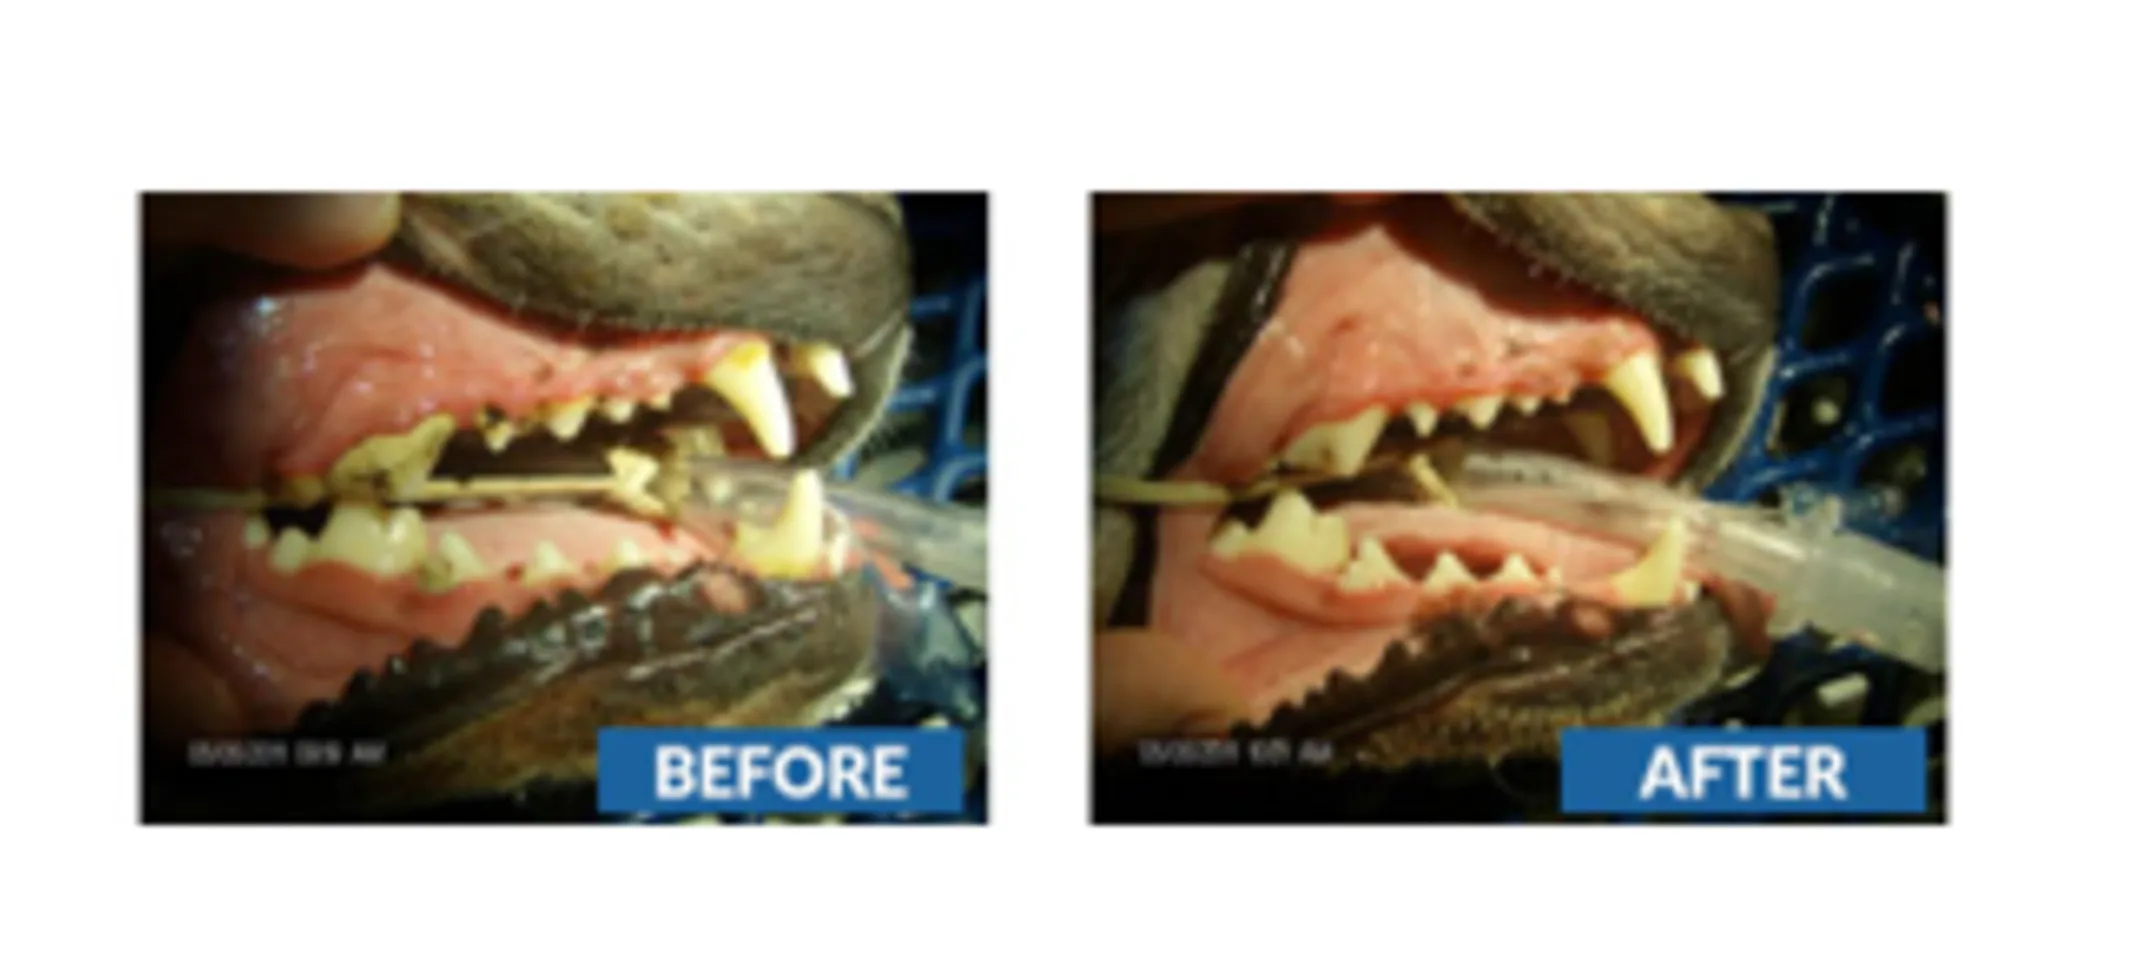 Canine Teeth view of before and after dental work.